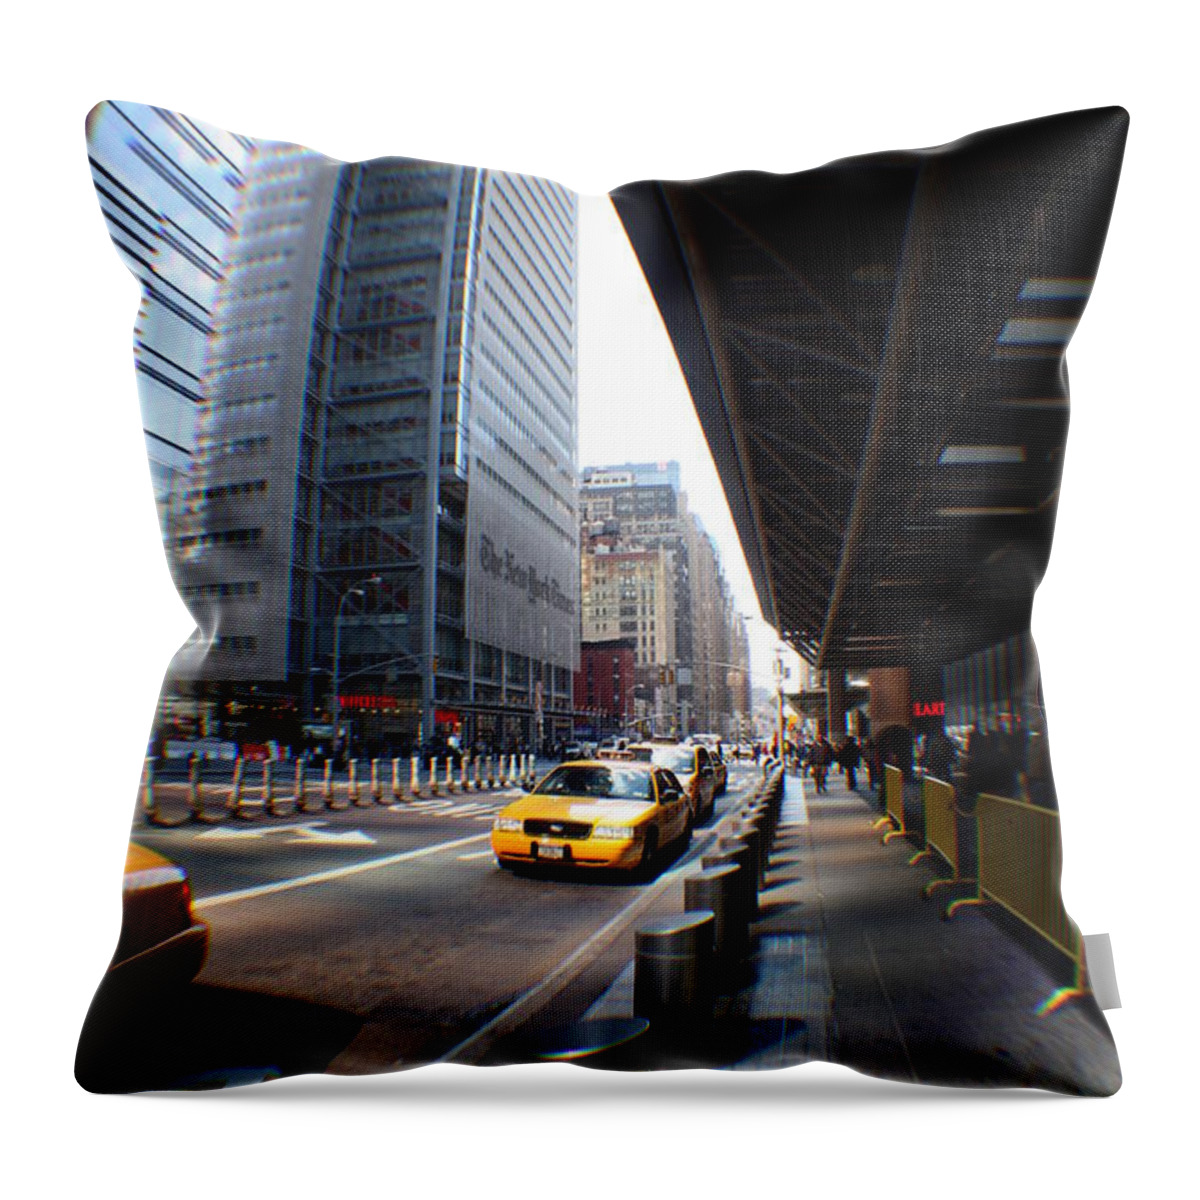 Rogerio Mariani New York Throw Pillow featuring the photograph Street NYC by Rogerio Mariani